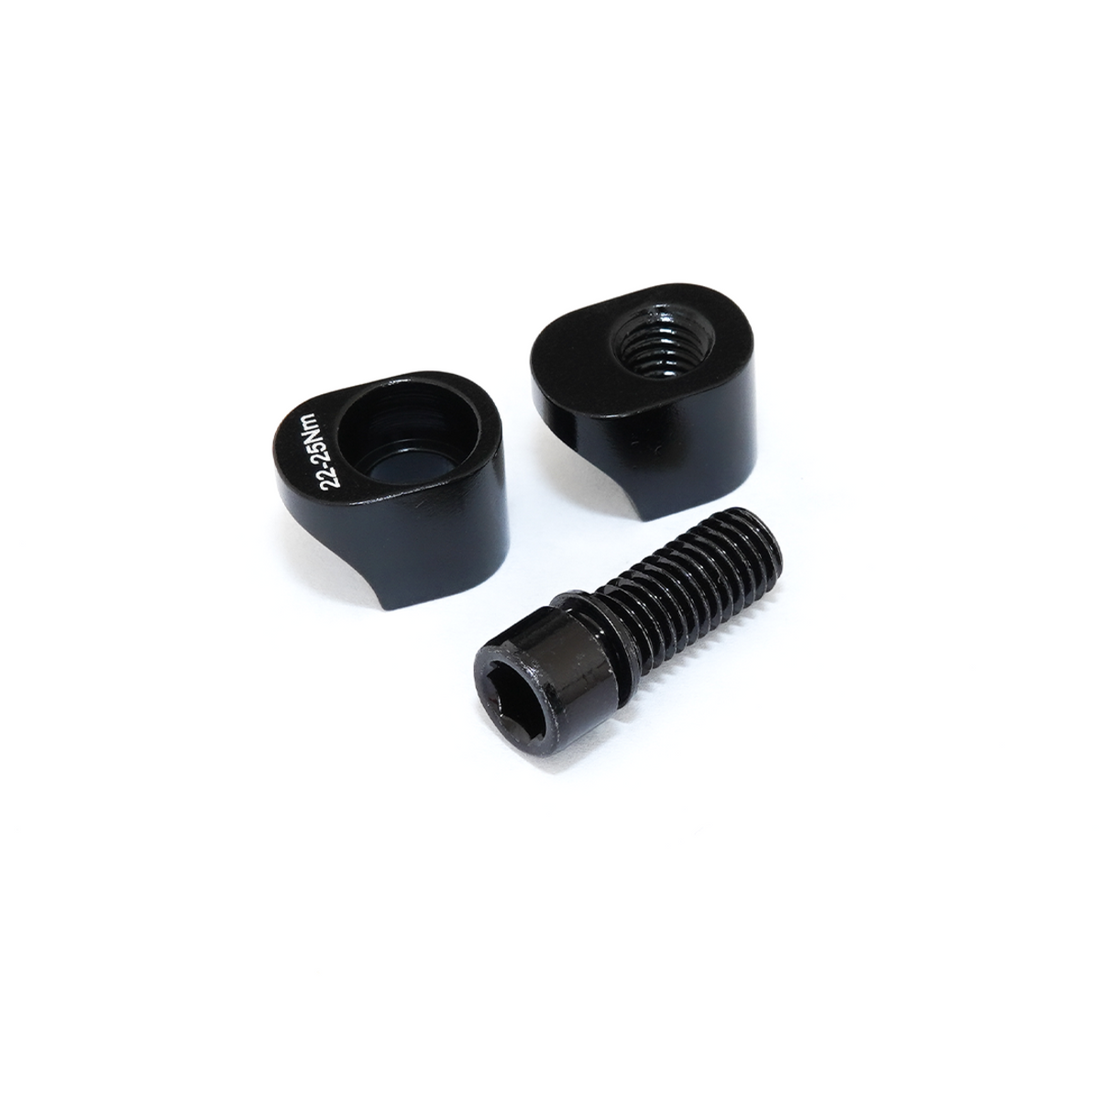 Box Two Center Clamp 1" Stem Wedge Kit - boxcomponents